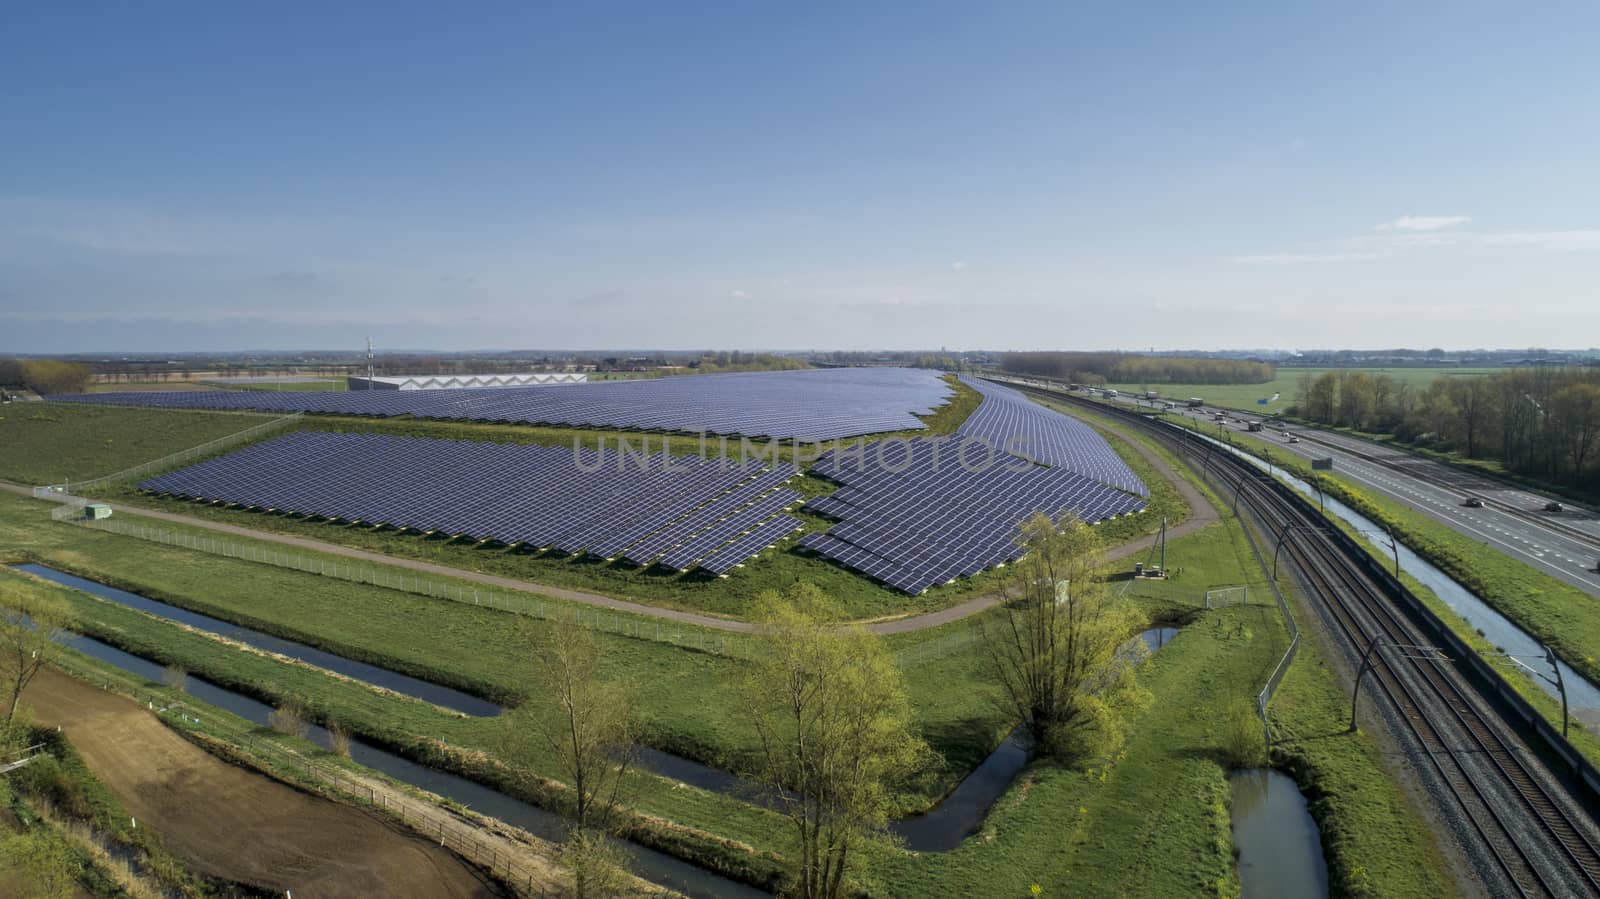 Aerial photography of modern large-scale photovoltaic solar pane by Tjeerdkruse